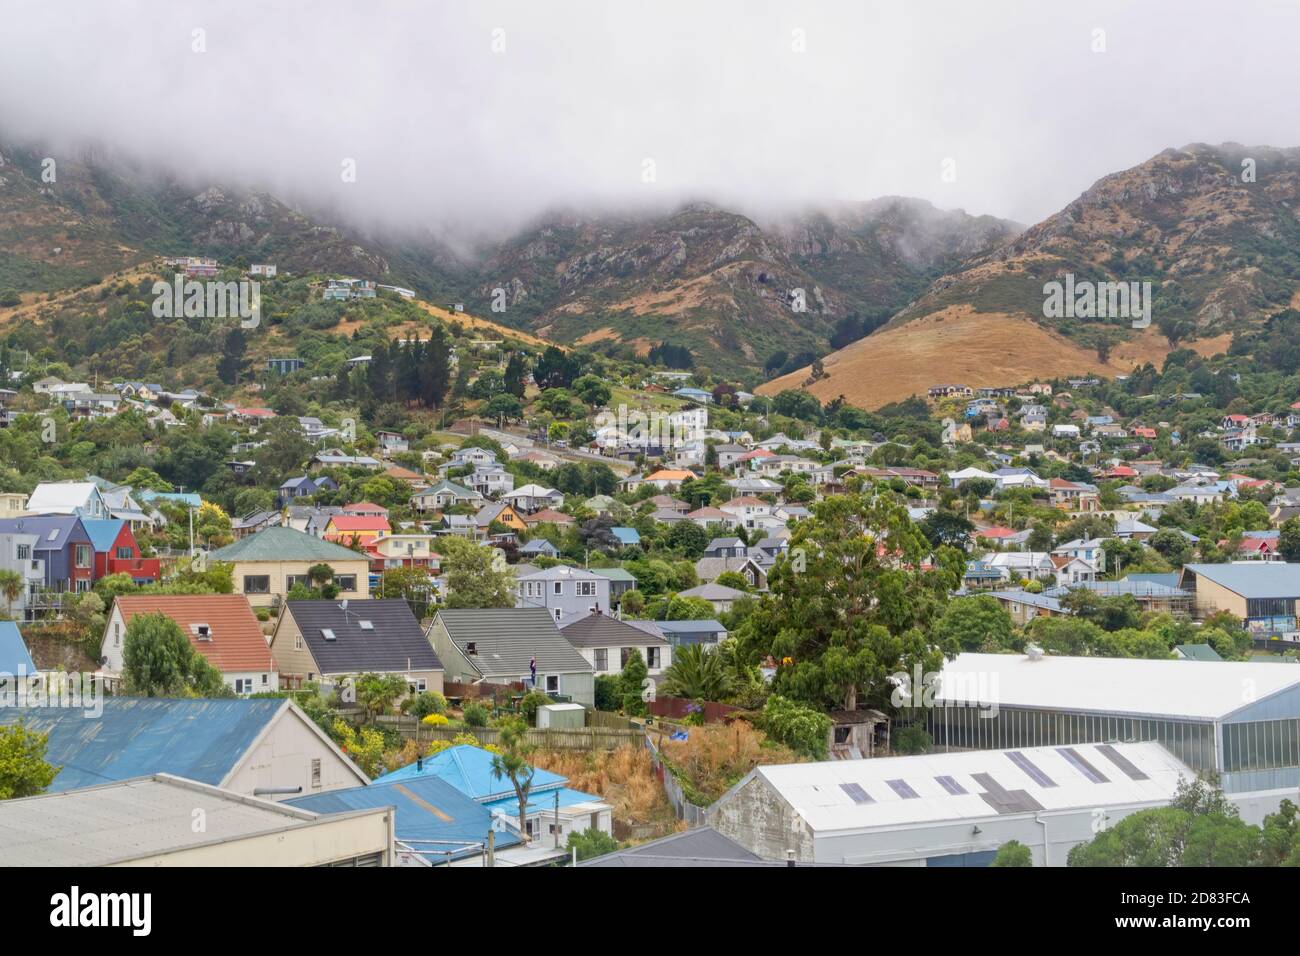 The cloud covered hills around the town of Lyttelton NZ Stock Photo